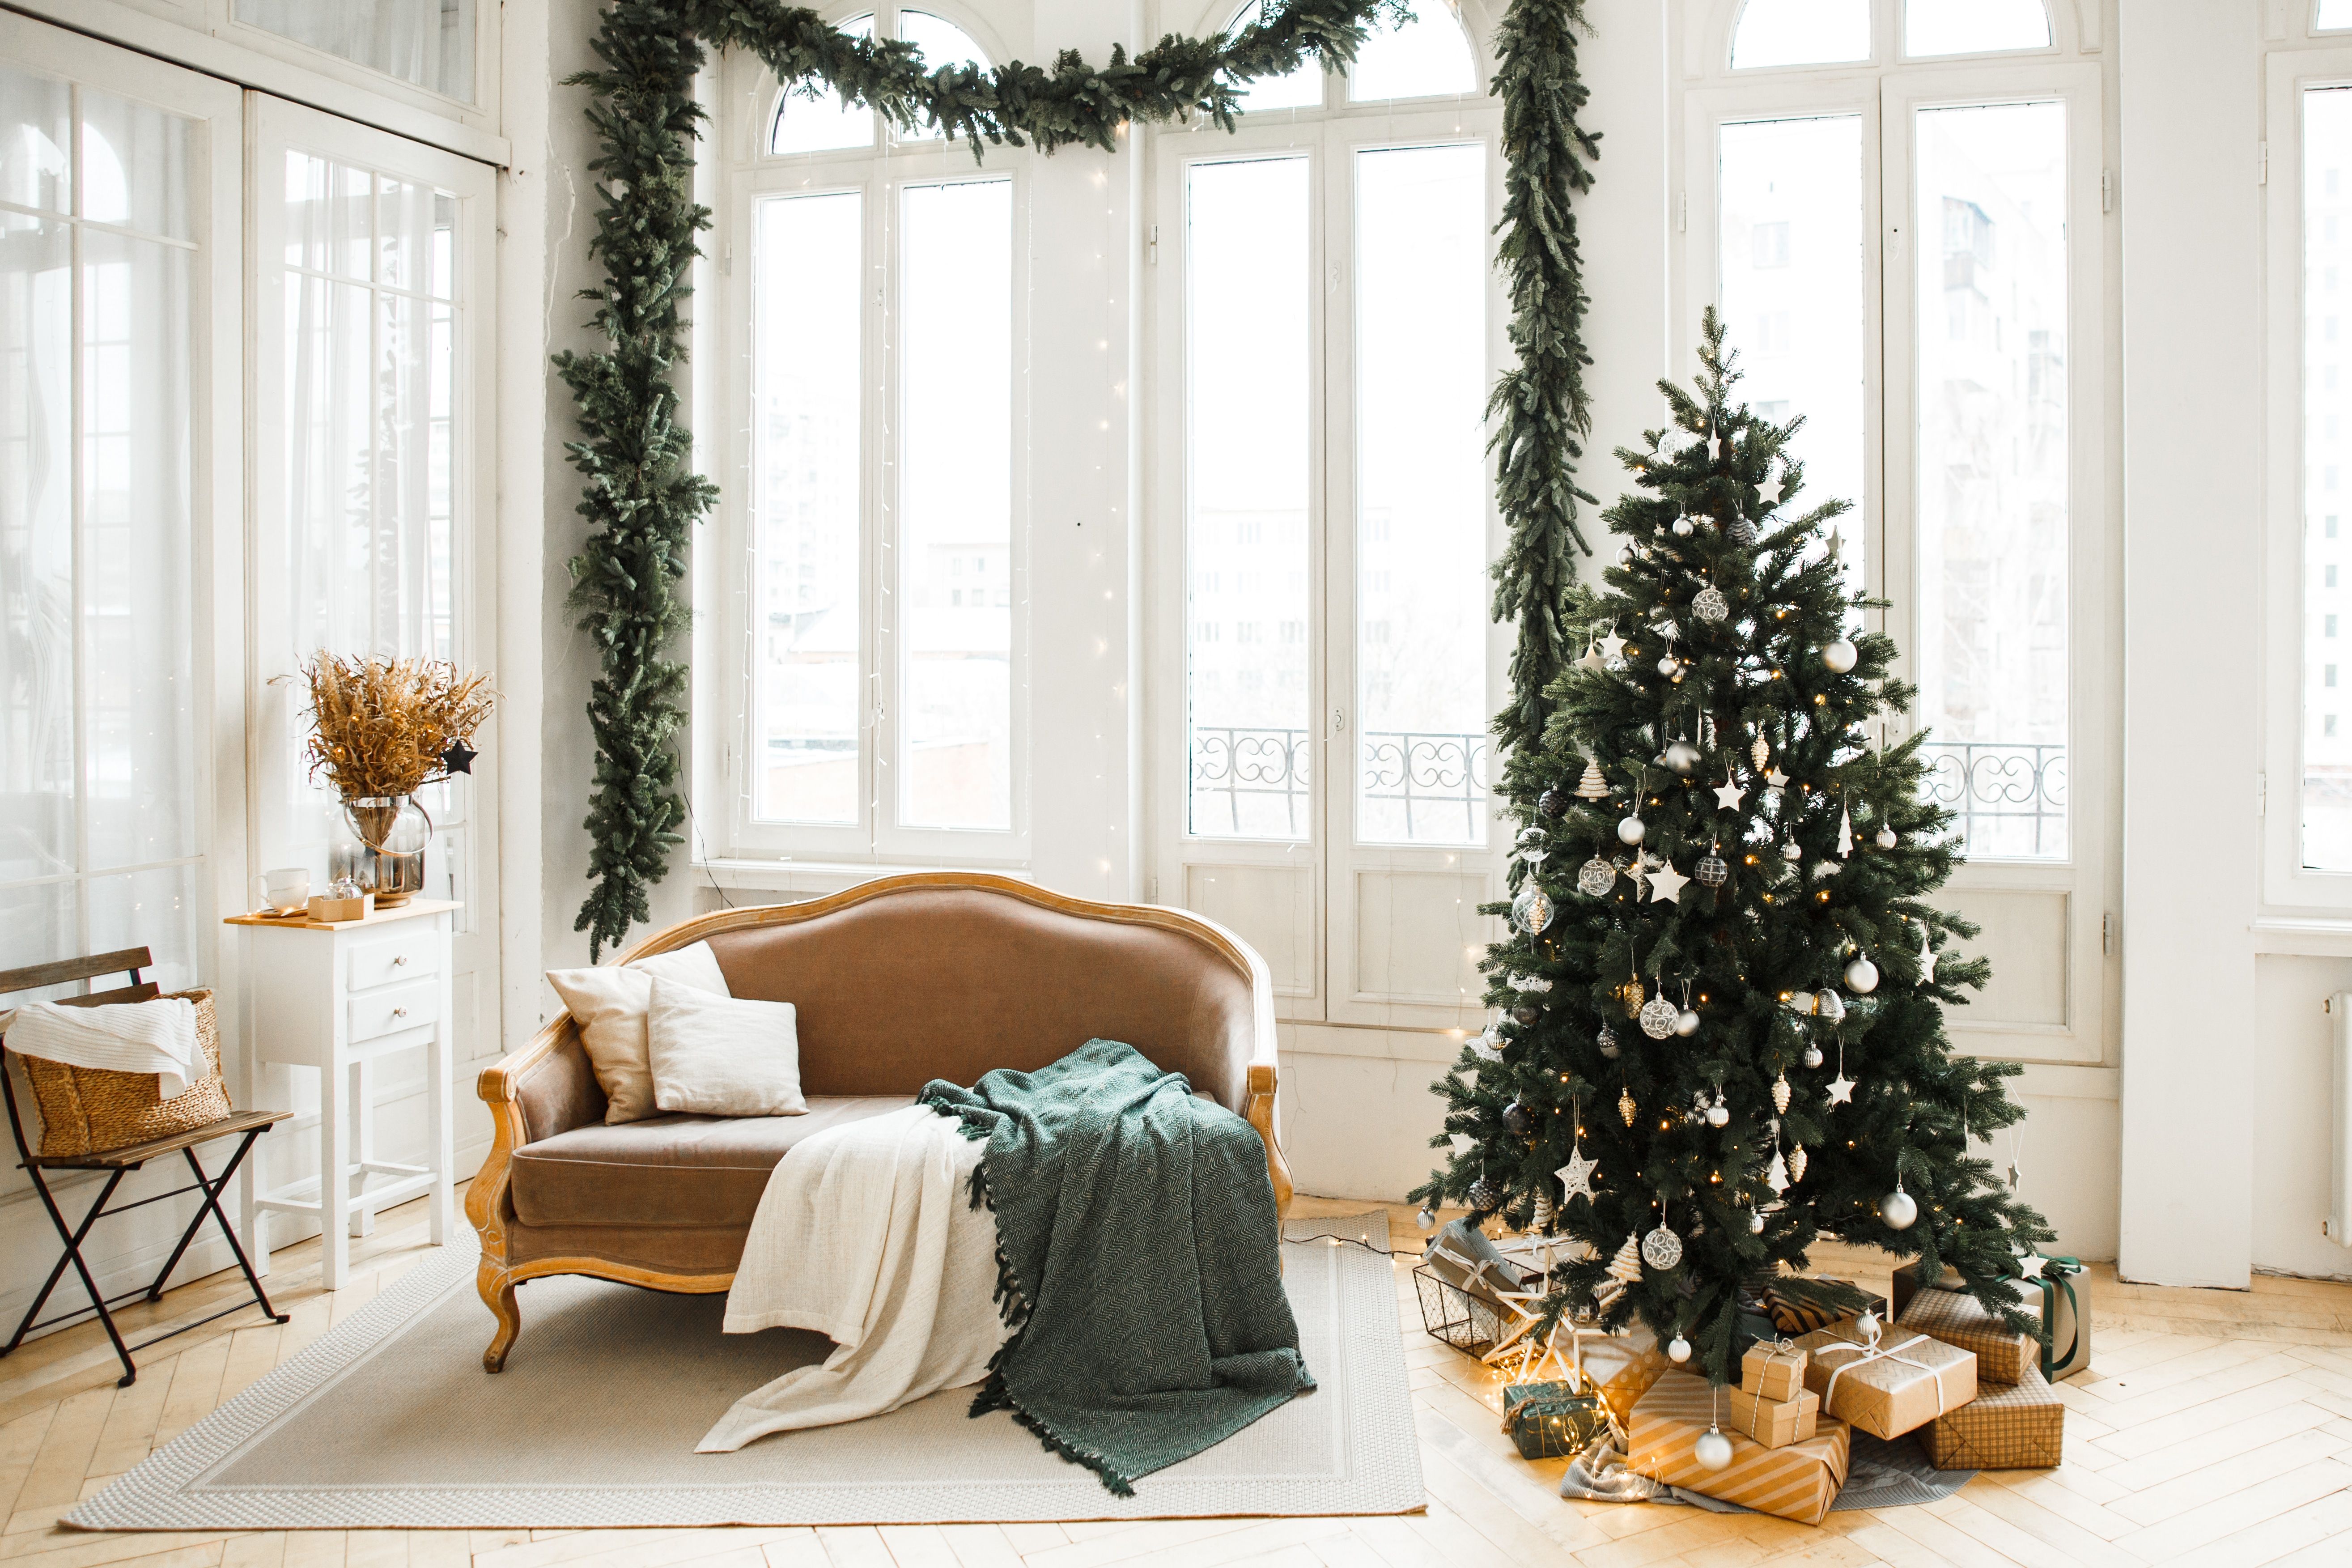 10 easy Christmas decor ideas to spruce up your home without much ...